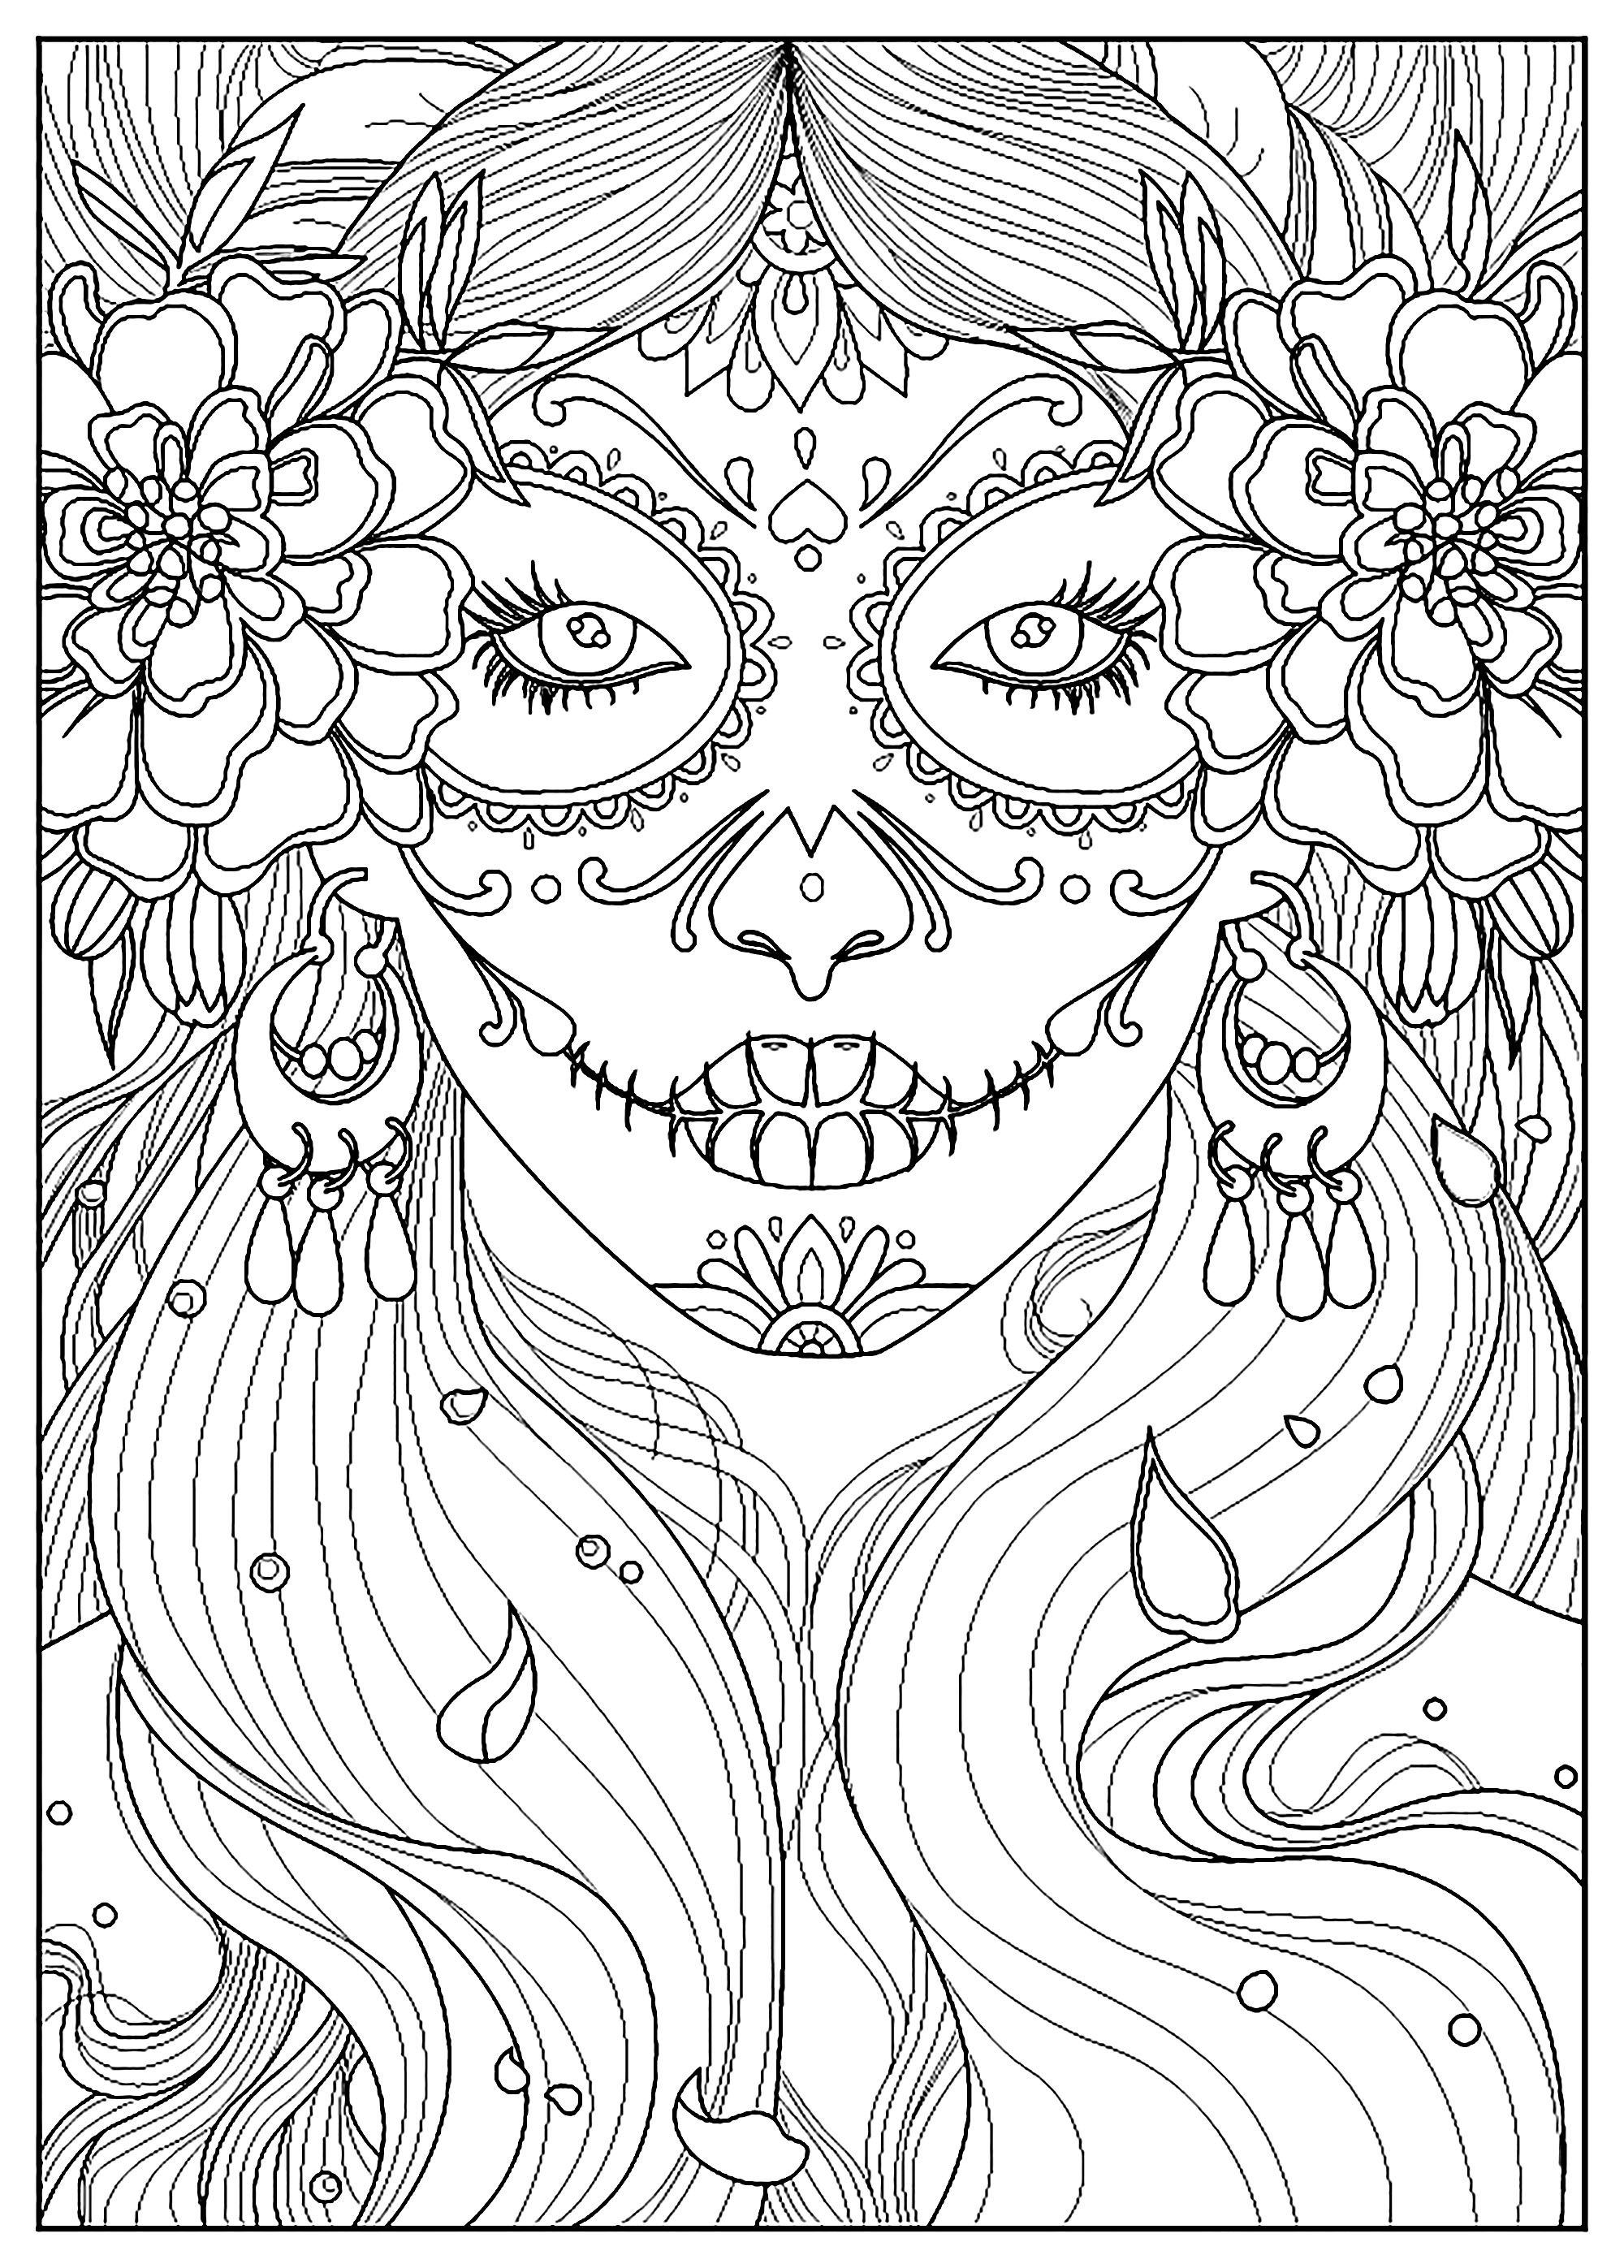 Woman - Coloring Pages for Adults - Page 3